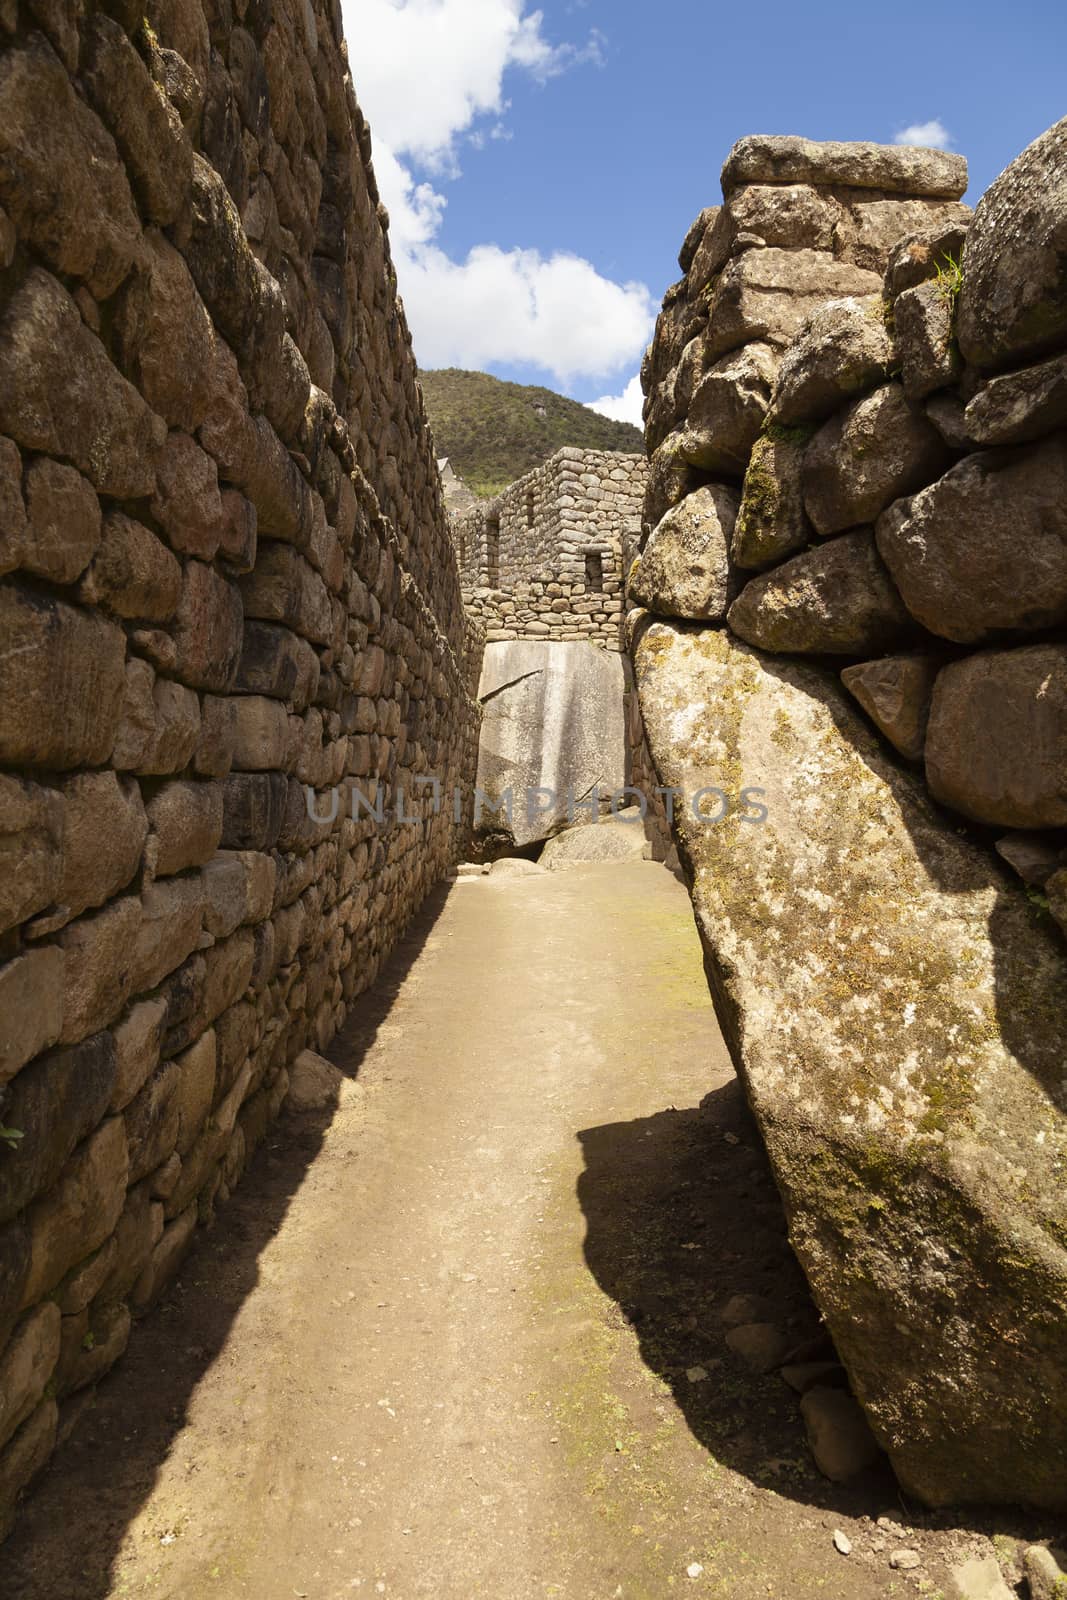 Machu Picchu, Peru - April 6, 2014: Architecture and details of the ancestral constructions and buildings of the Inca civilization, in Machu Picchu, Peru.